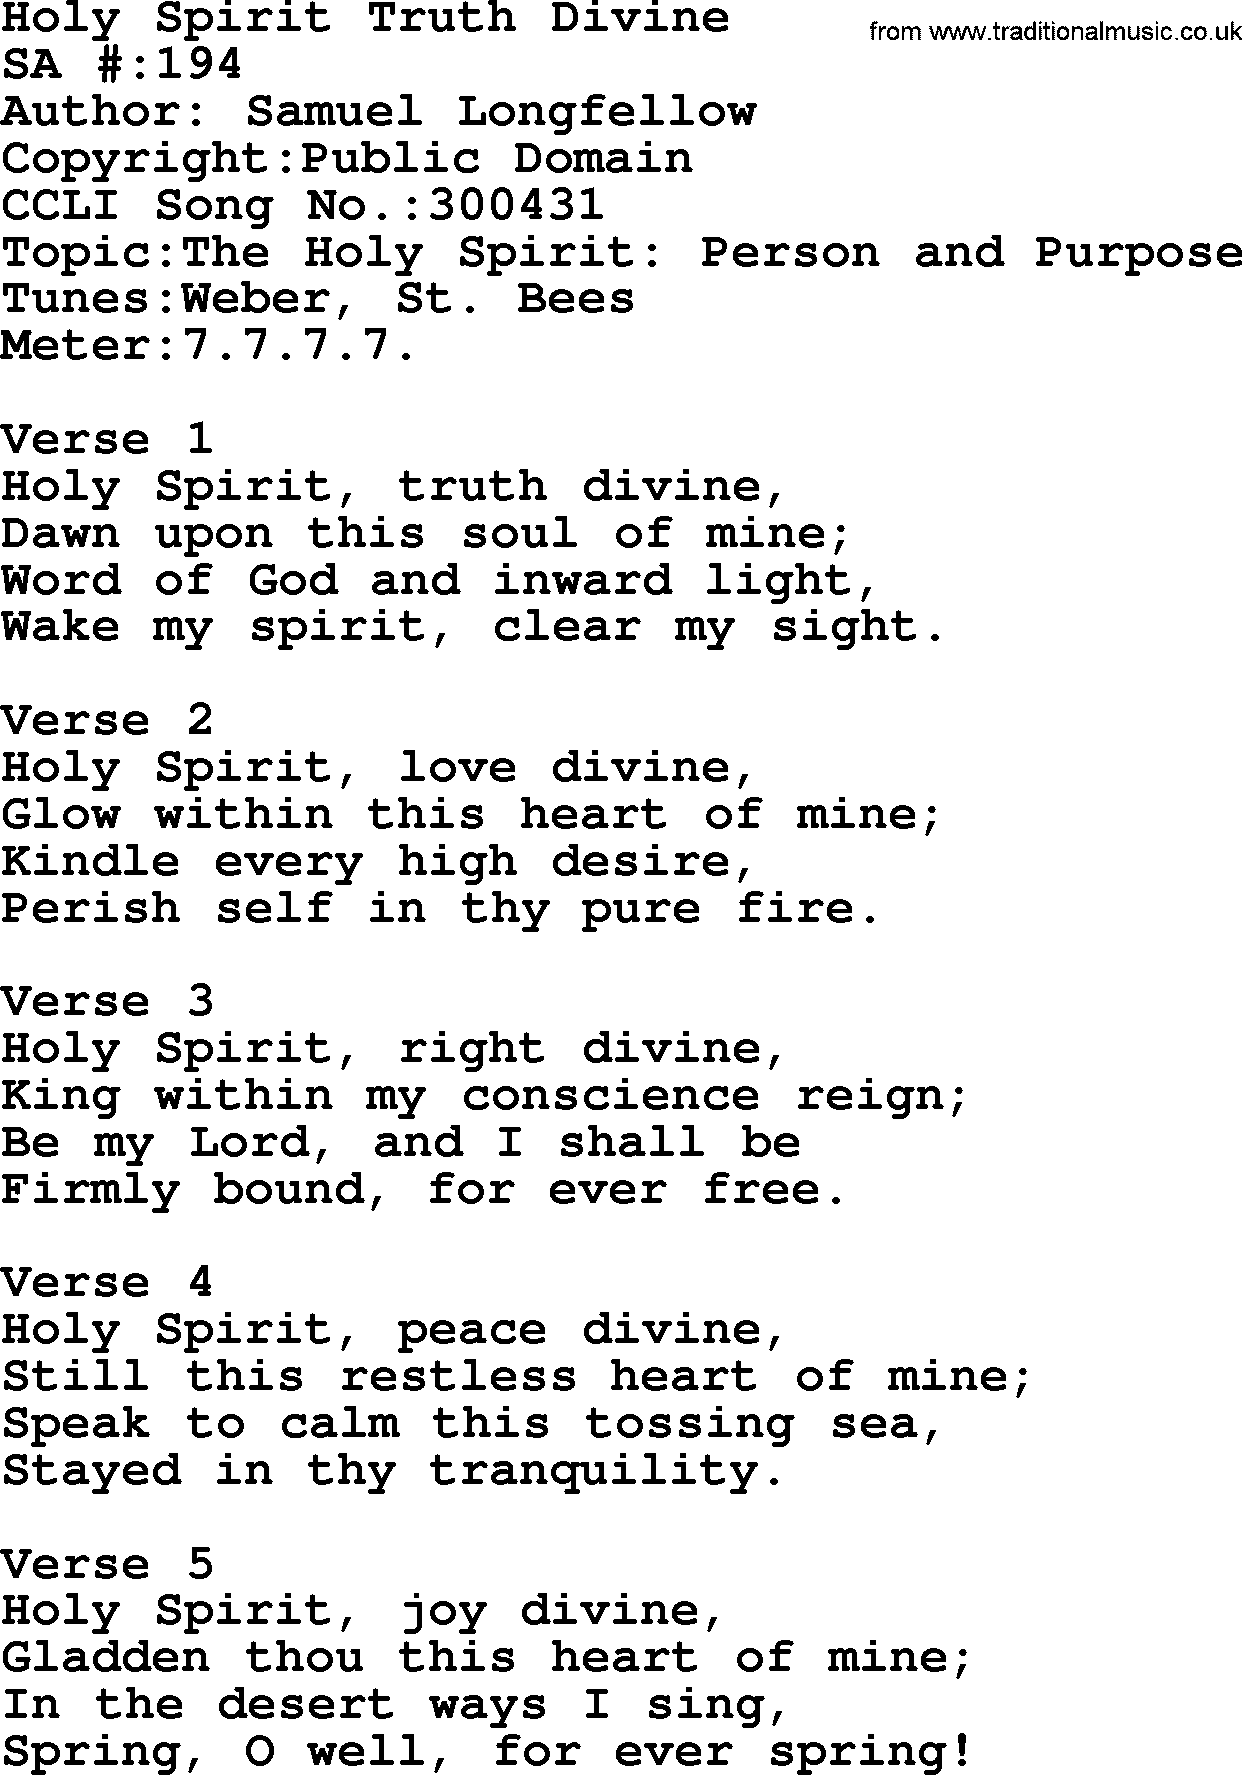 Salvation Army Hymnal, title: Holy Spirit Truth Divine, with lyrics and PDF,